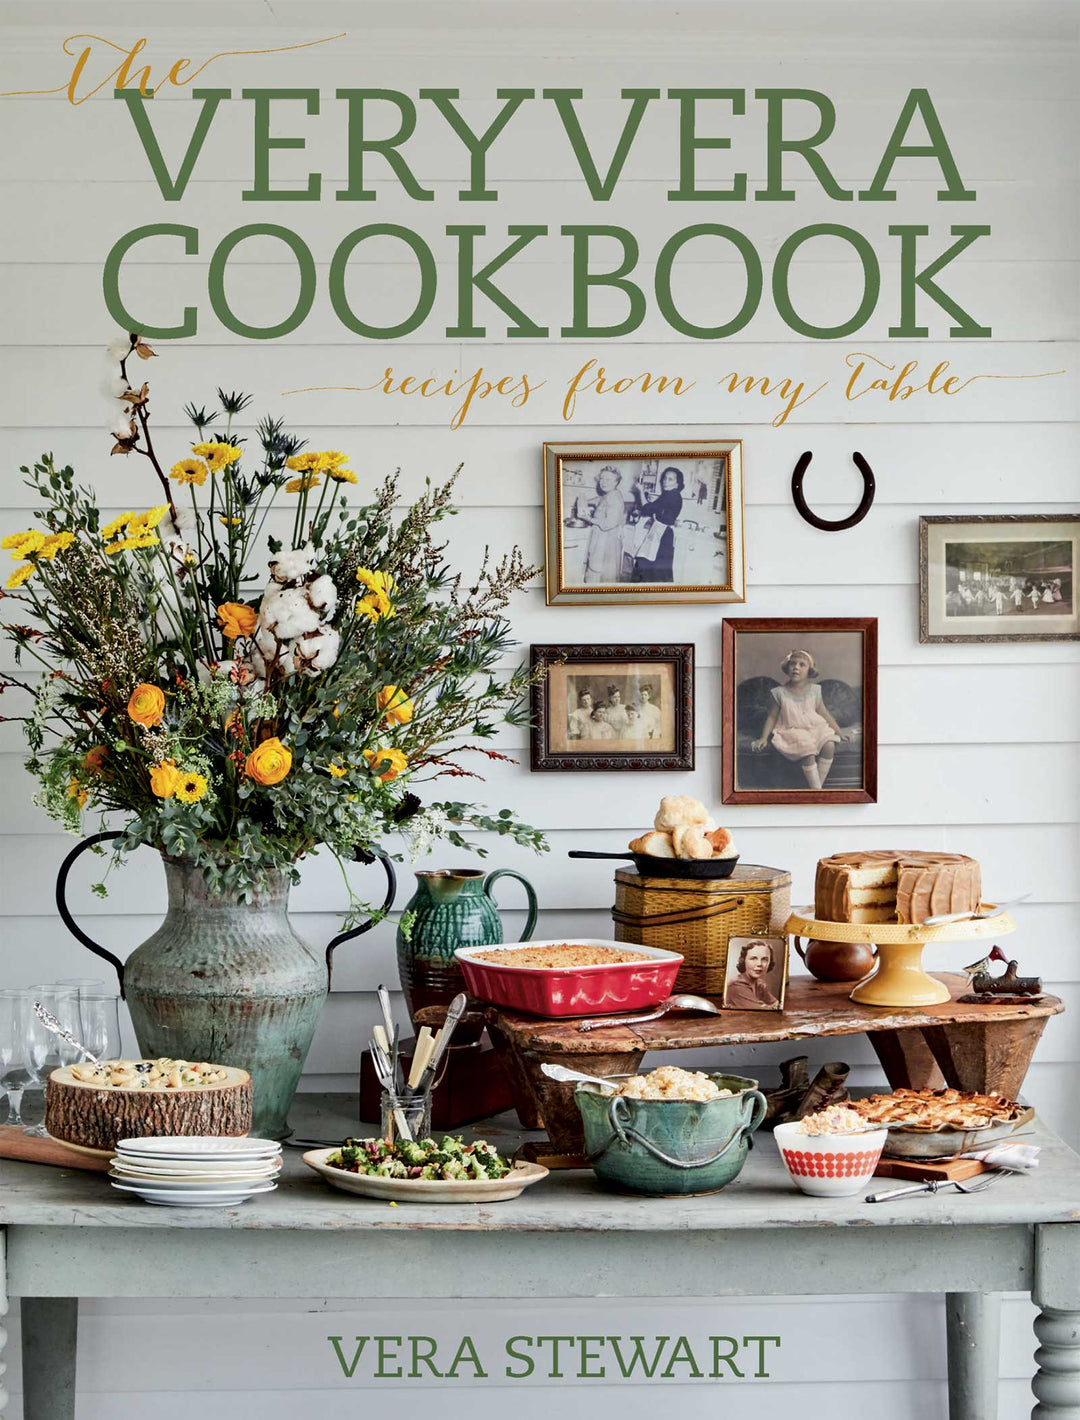 THE VERY VERA COOKBOOK: RECIPES FROM MY TABLE